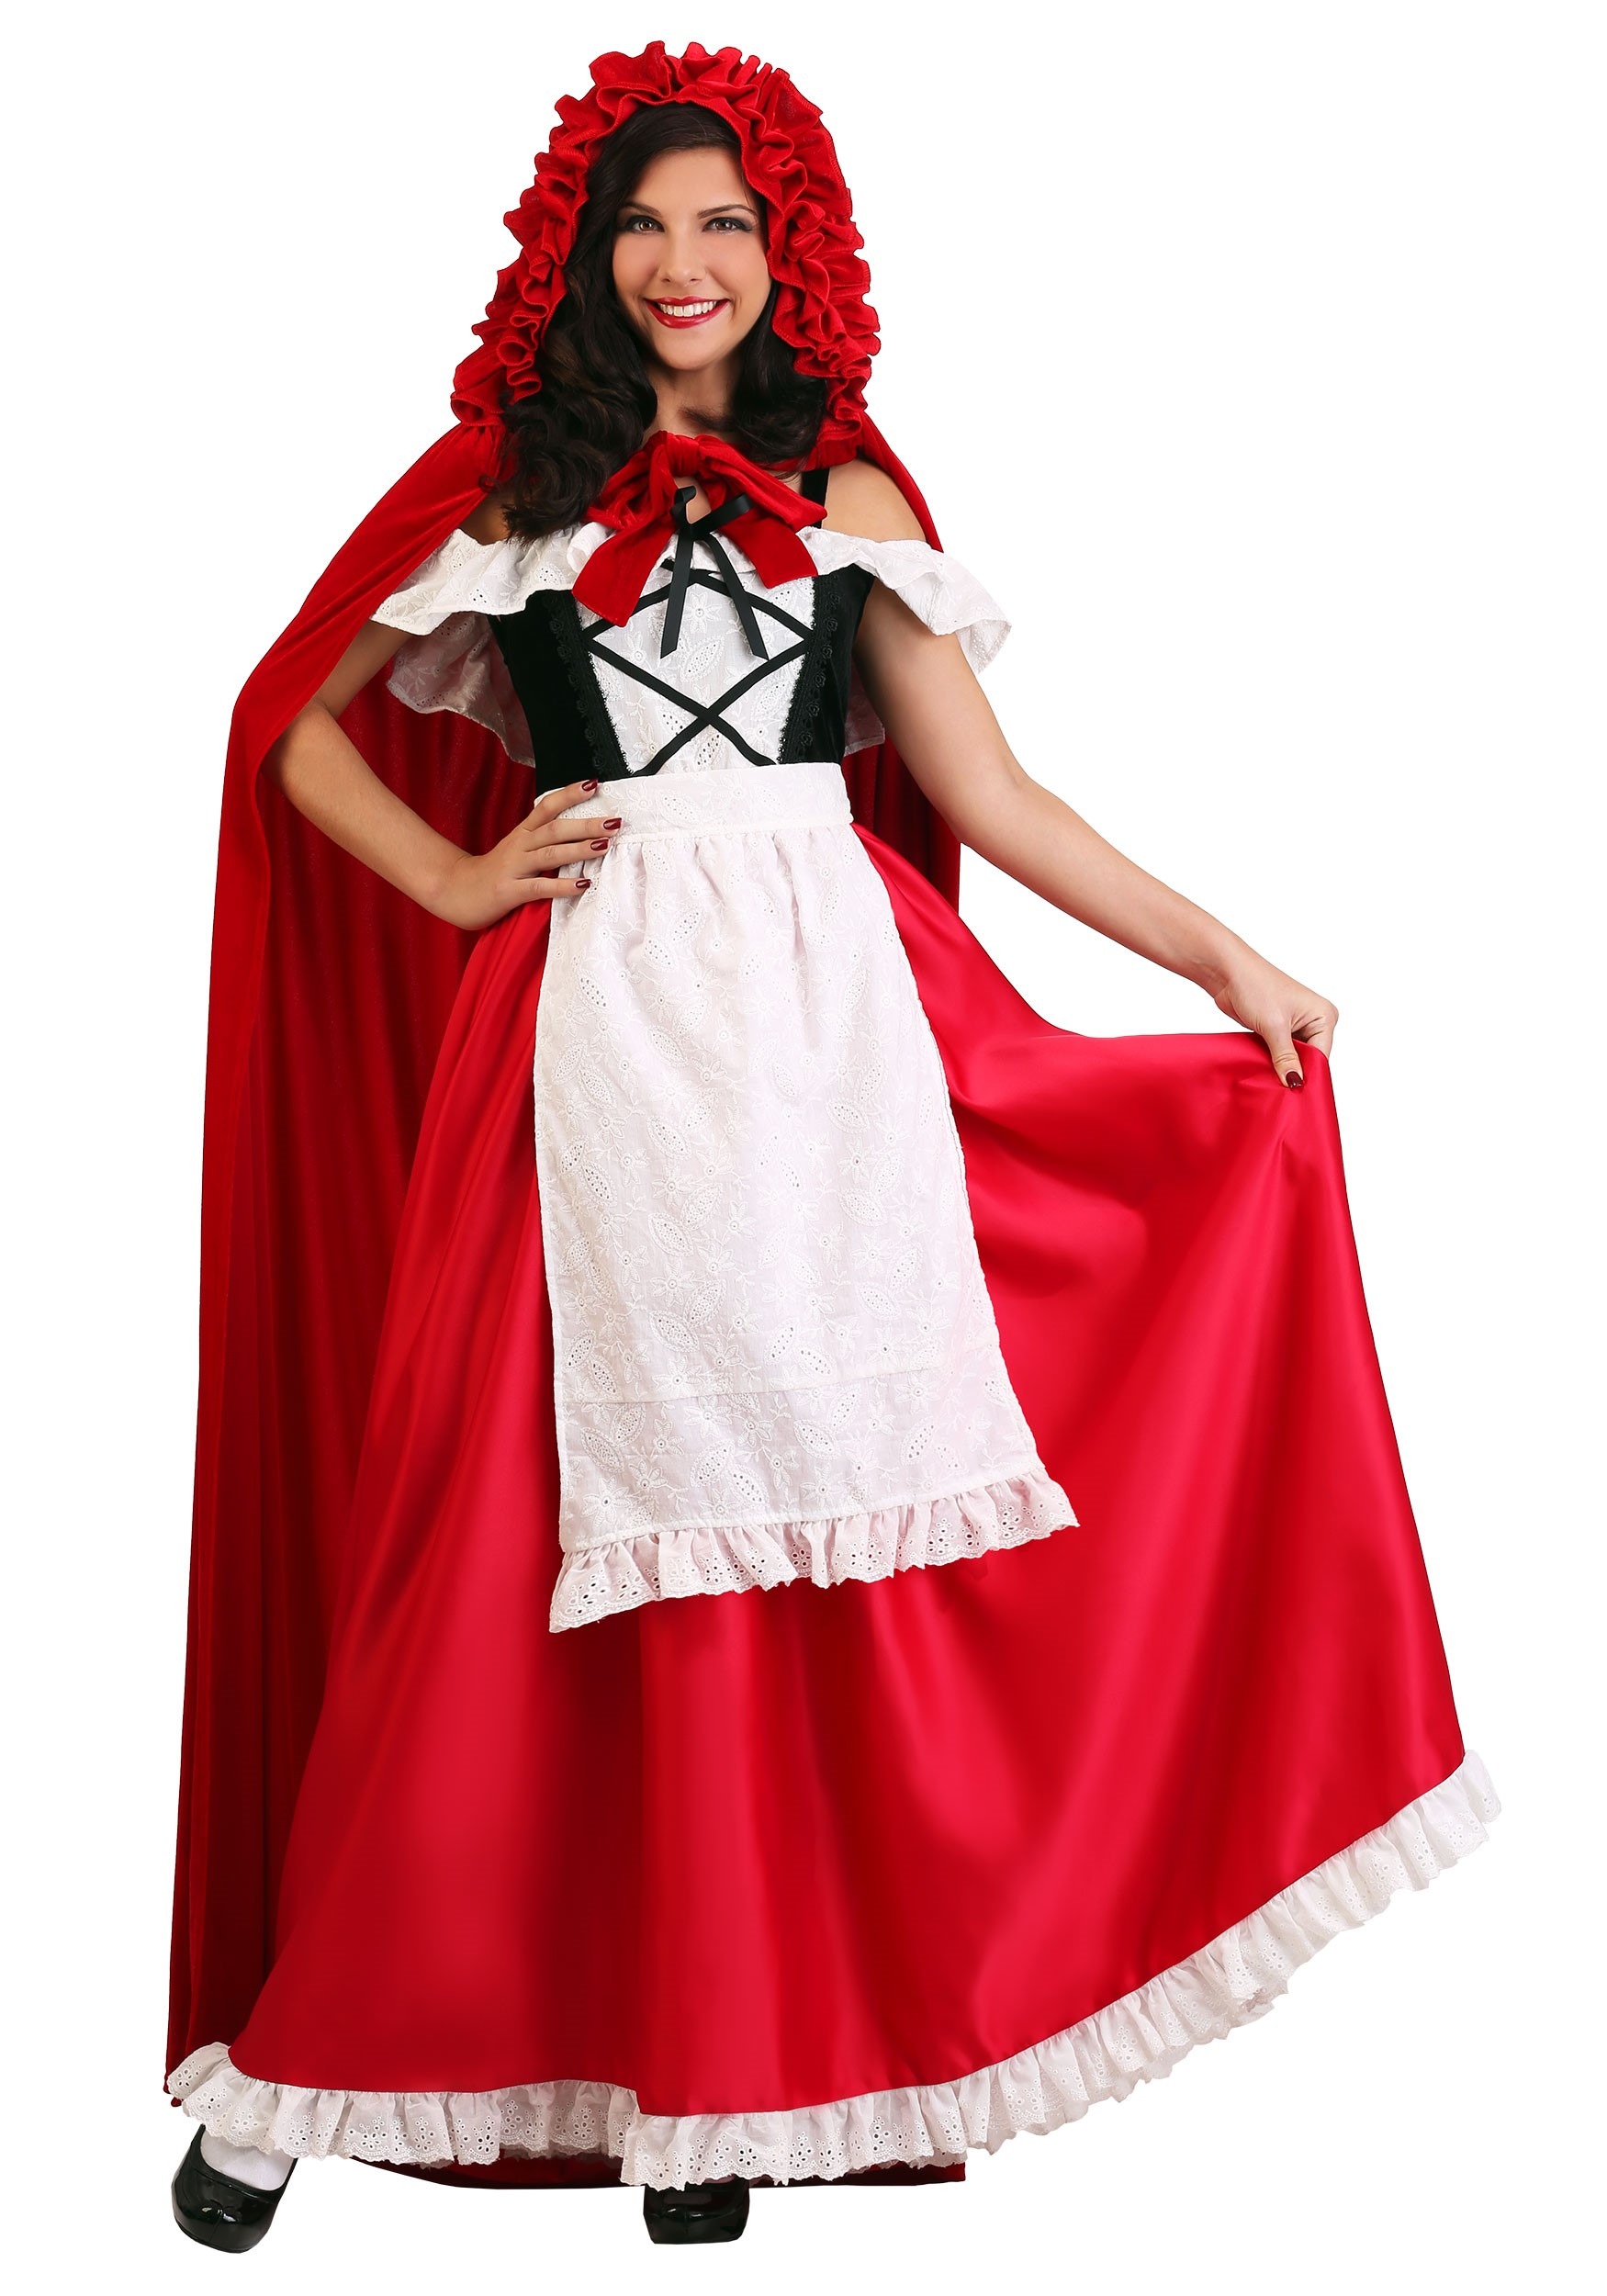 Image of Deluxe Red Riding Hood Women's Costume ID FUN6697AD-L